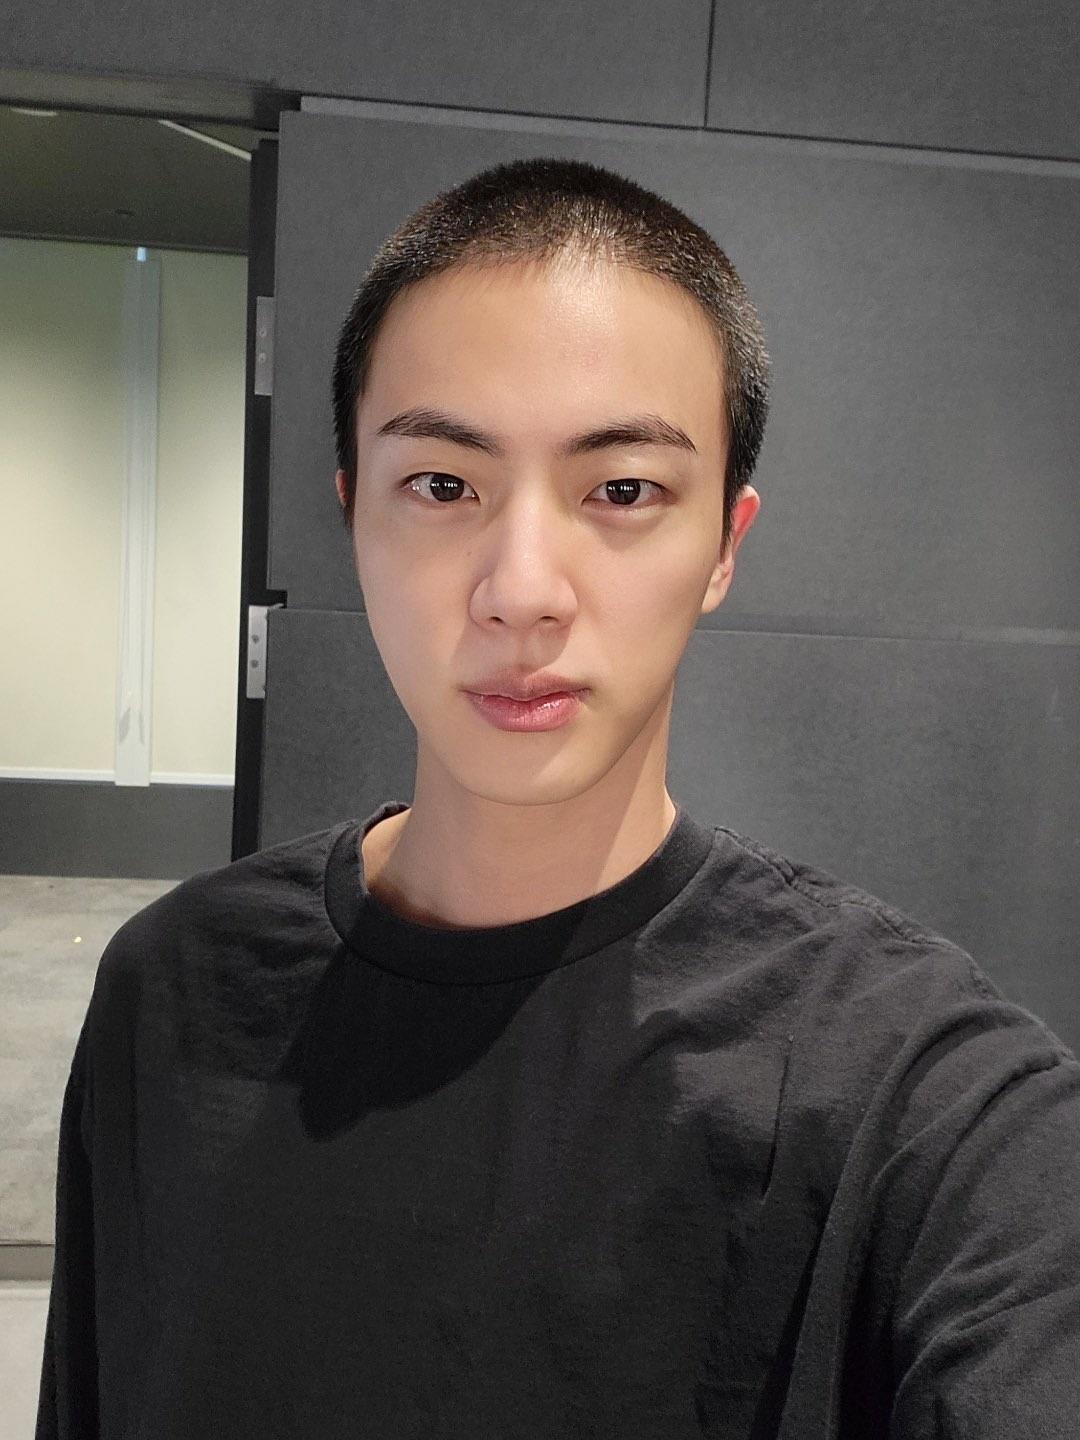 BTS' Jin gets new buzz cut ahead of military enlistment, it's cuter than he thought